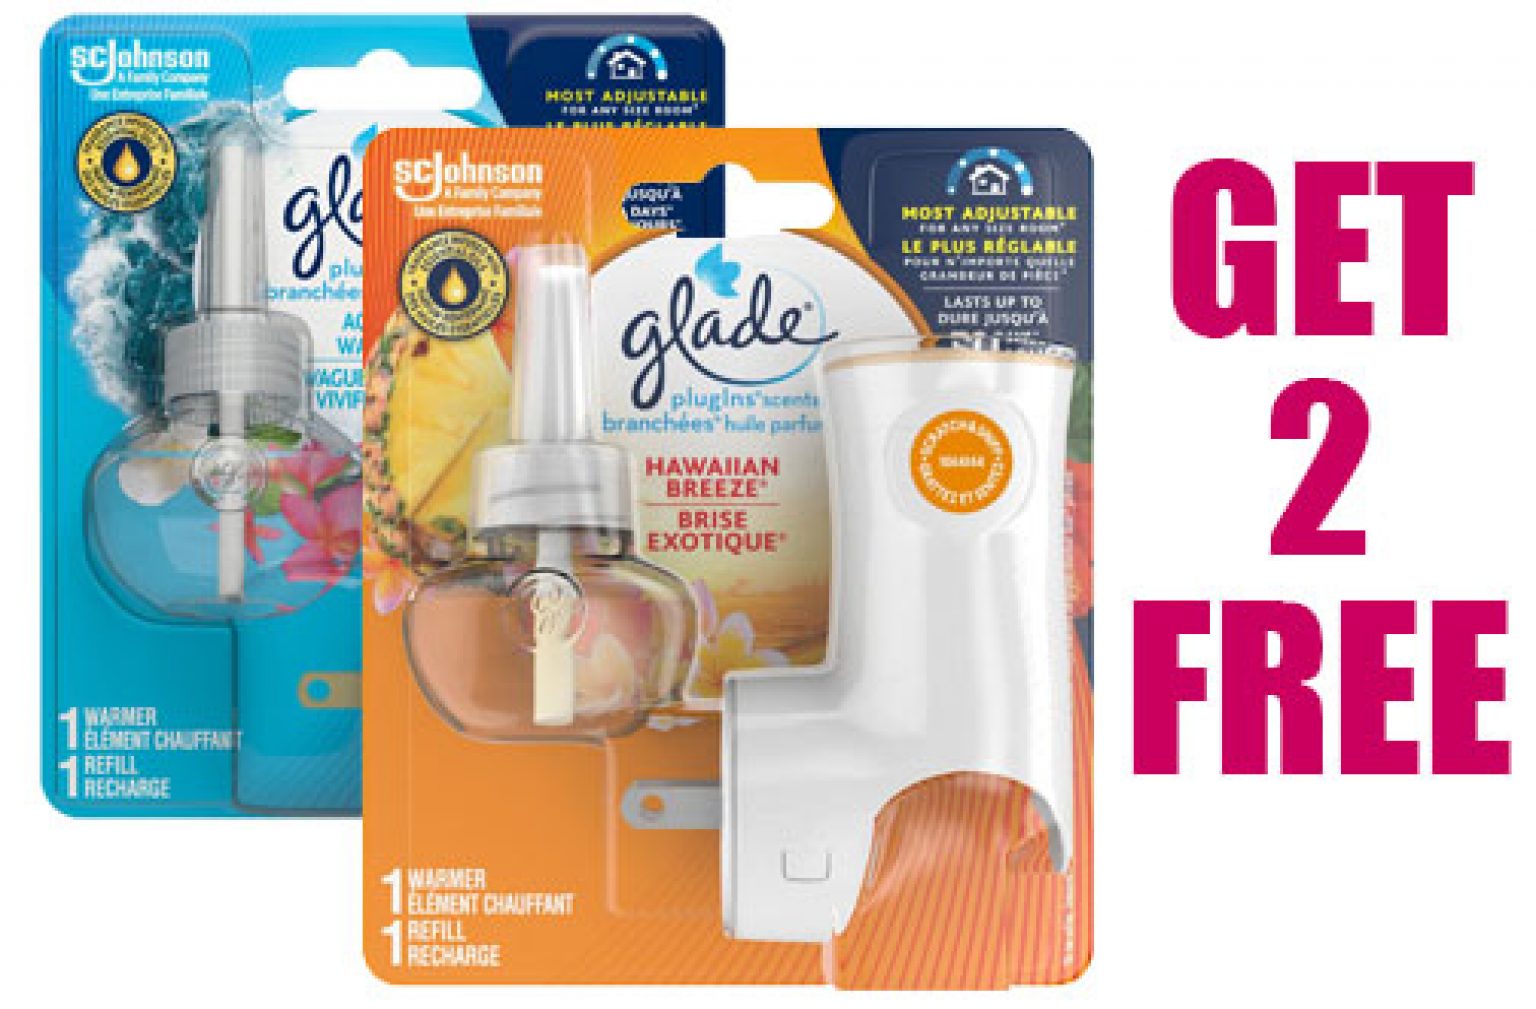 get-2-free-glade-plugins-scented-oil-starter-kits-deals-from-savealoonie